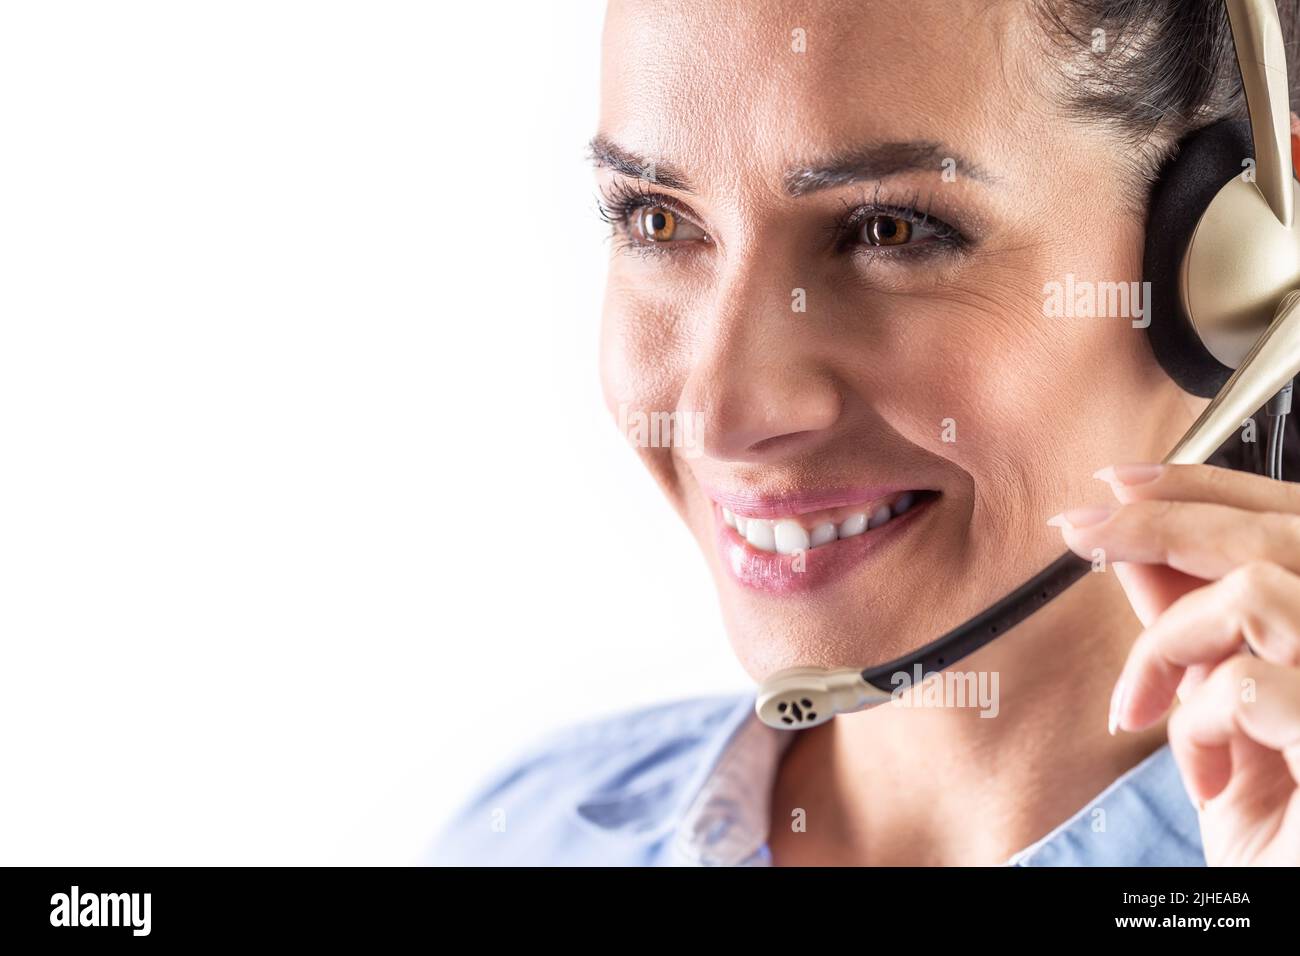 Hotline or call center worker smiling as she responds to a call to a customer service center. Stock Photo